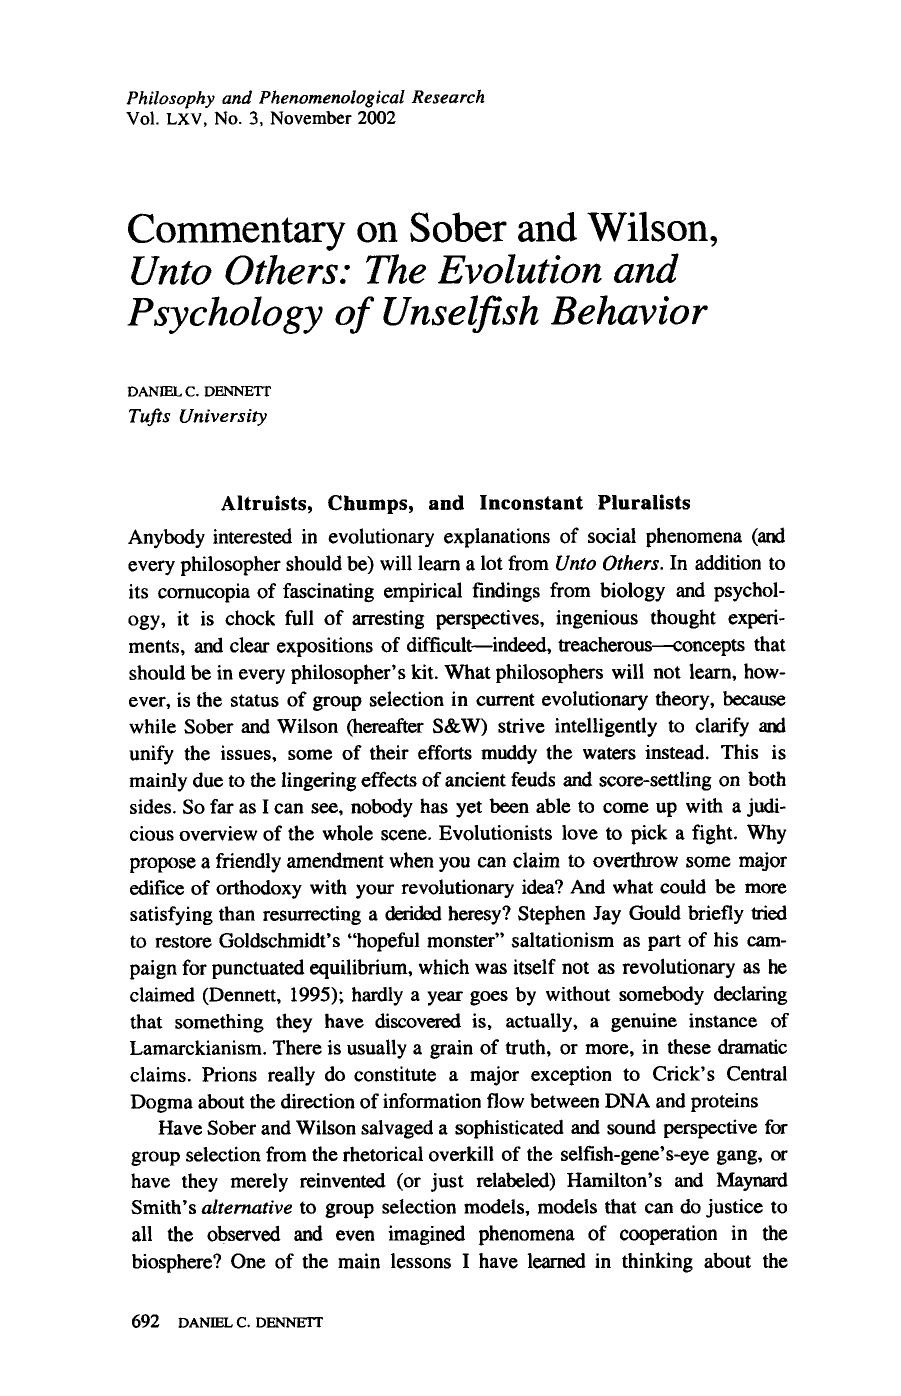 Commentary on Sober and Wilson, Unto Others: The Evolution and Psychology of Unselfish Behavior by Commentary on Sober & Wilson Unto Others (2002)